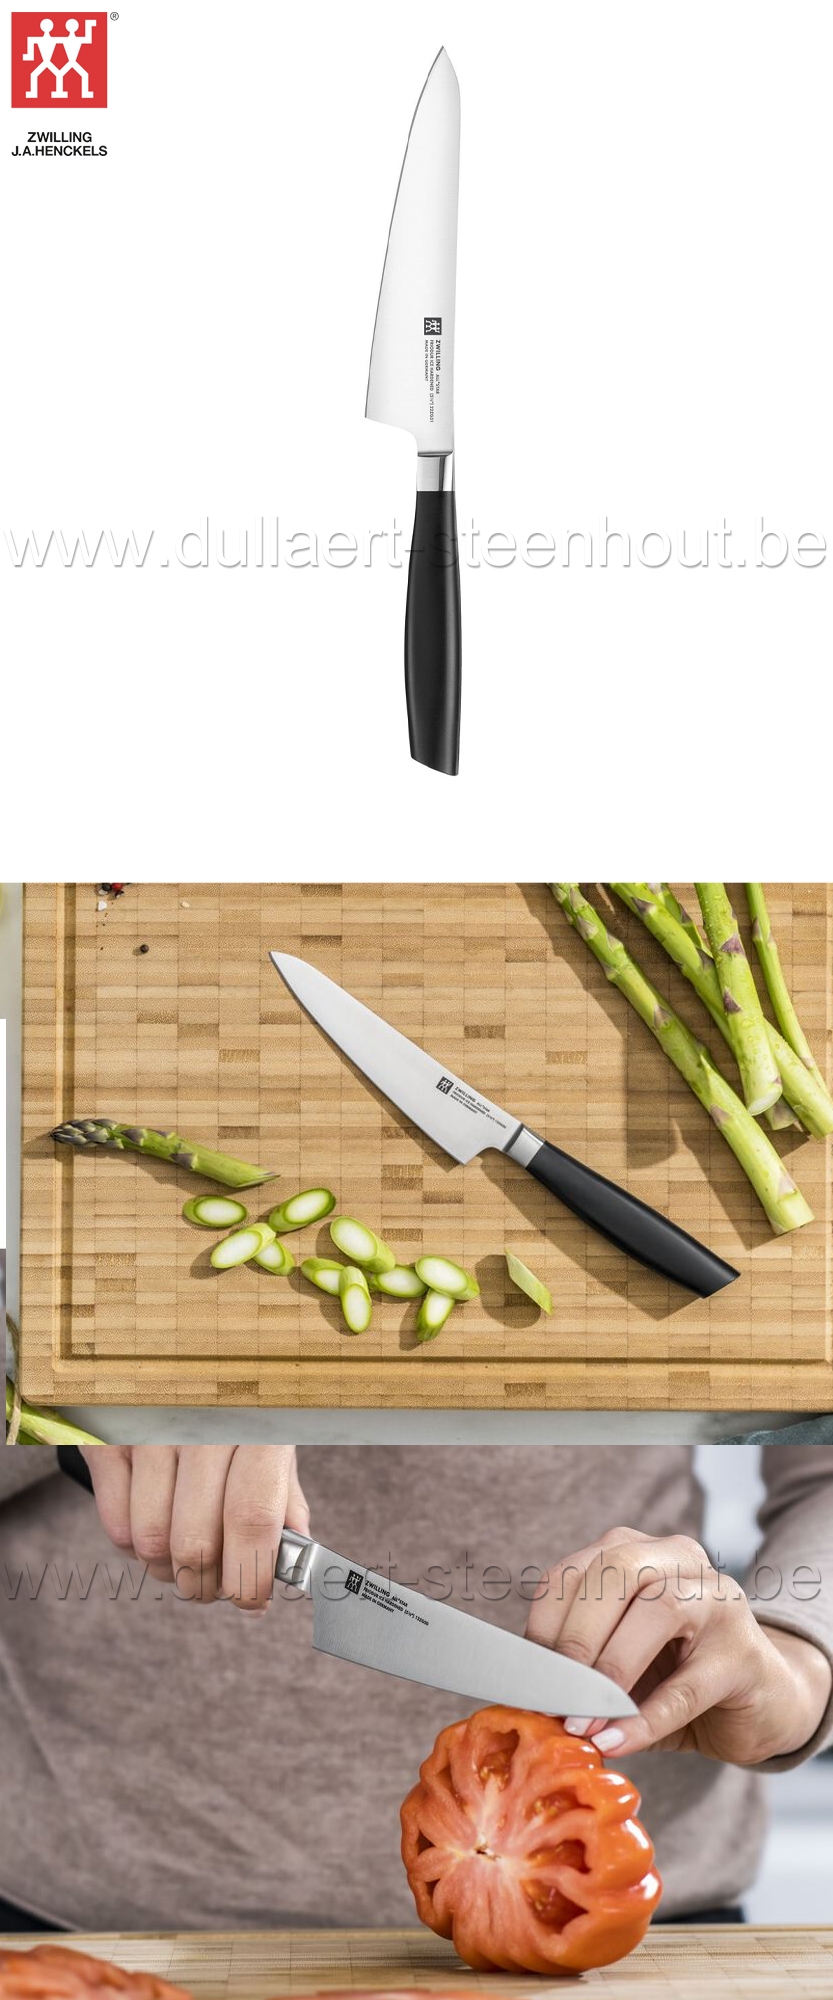 Zwilling All Star compact koksmes 14cm